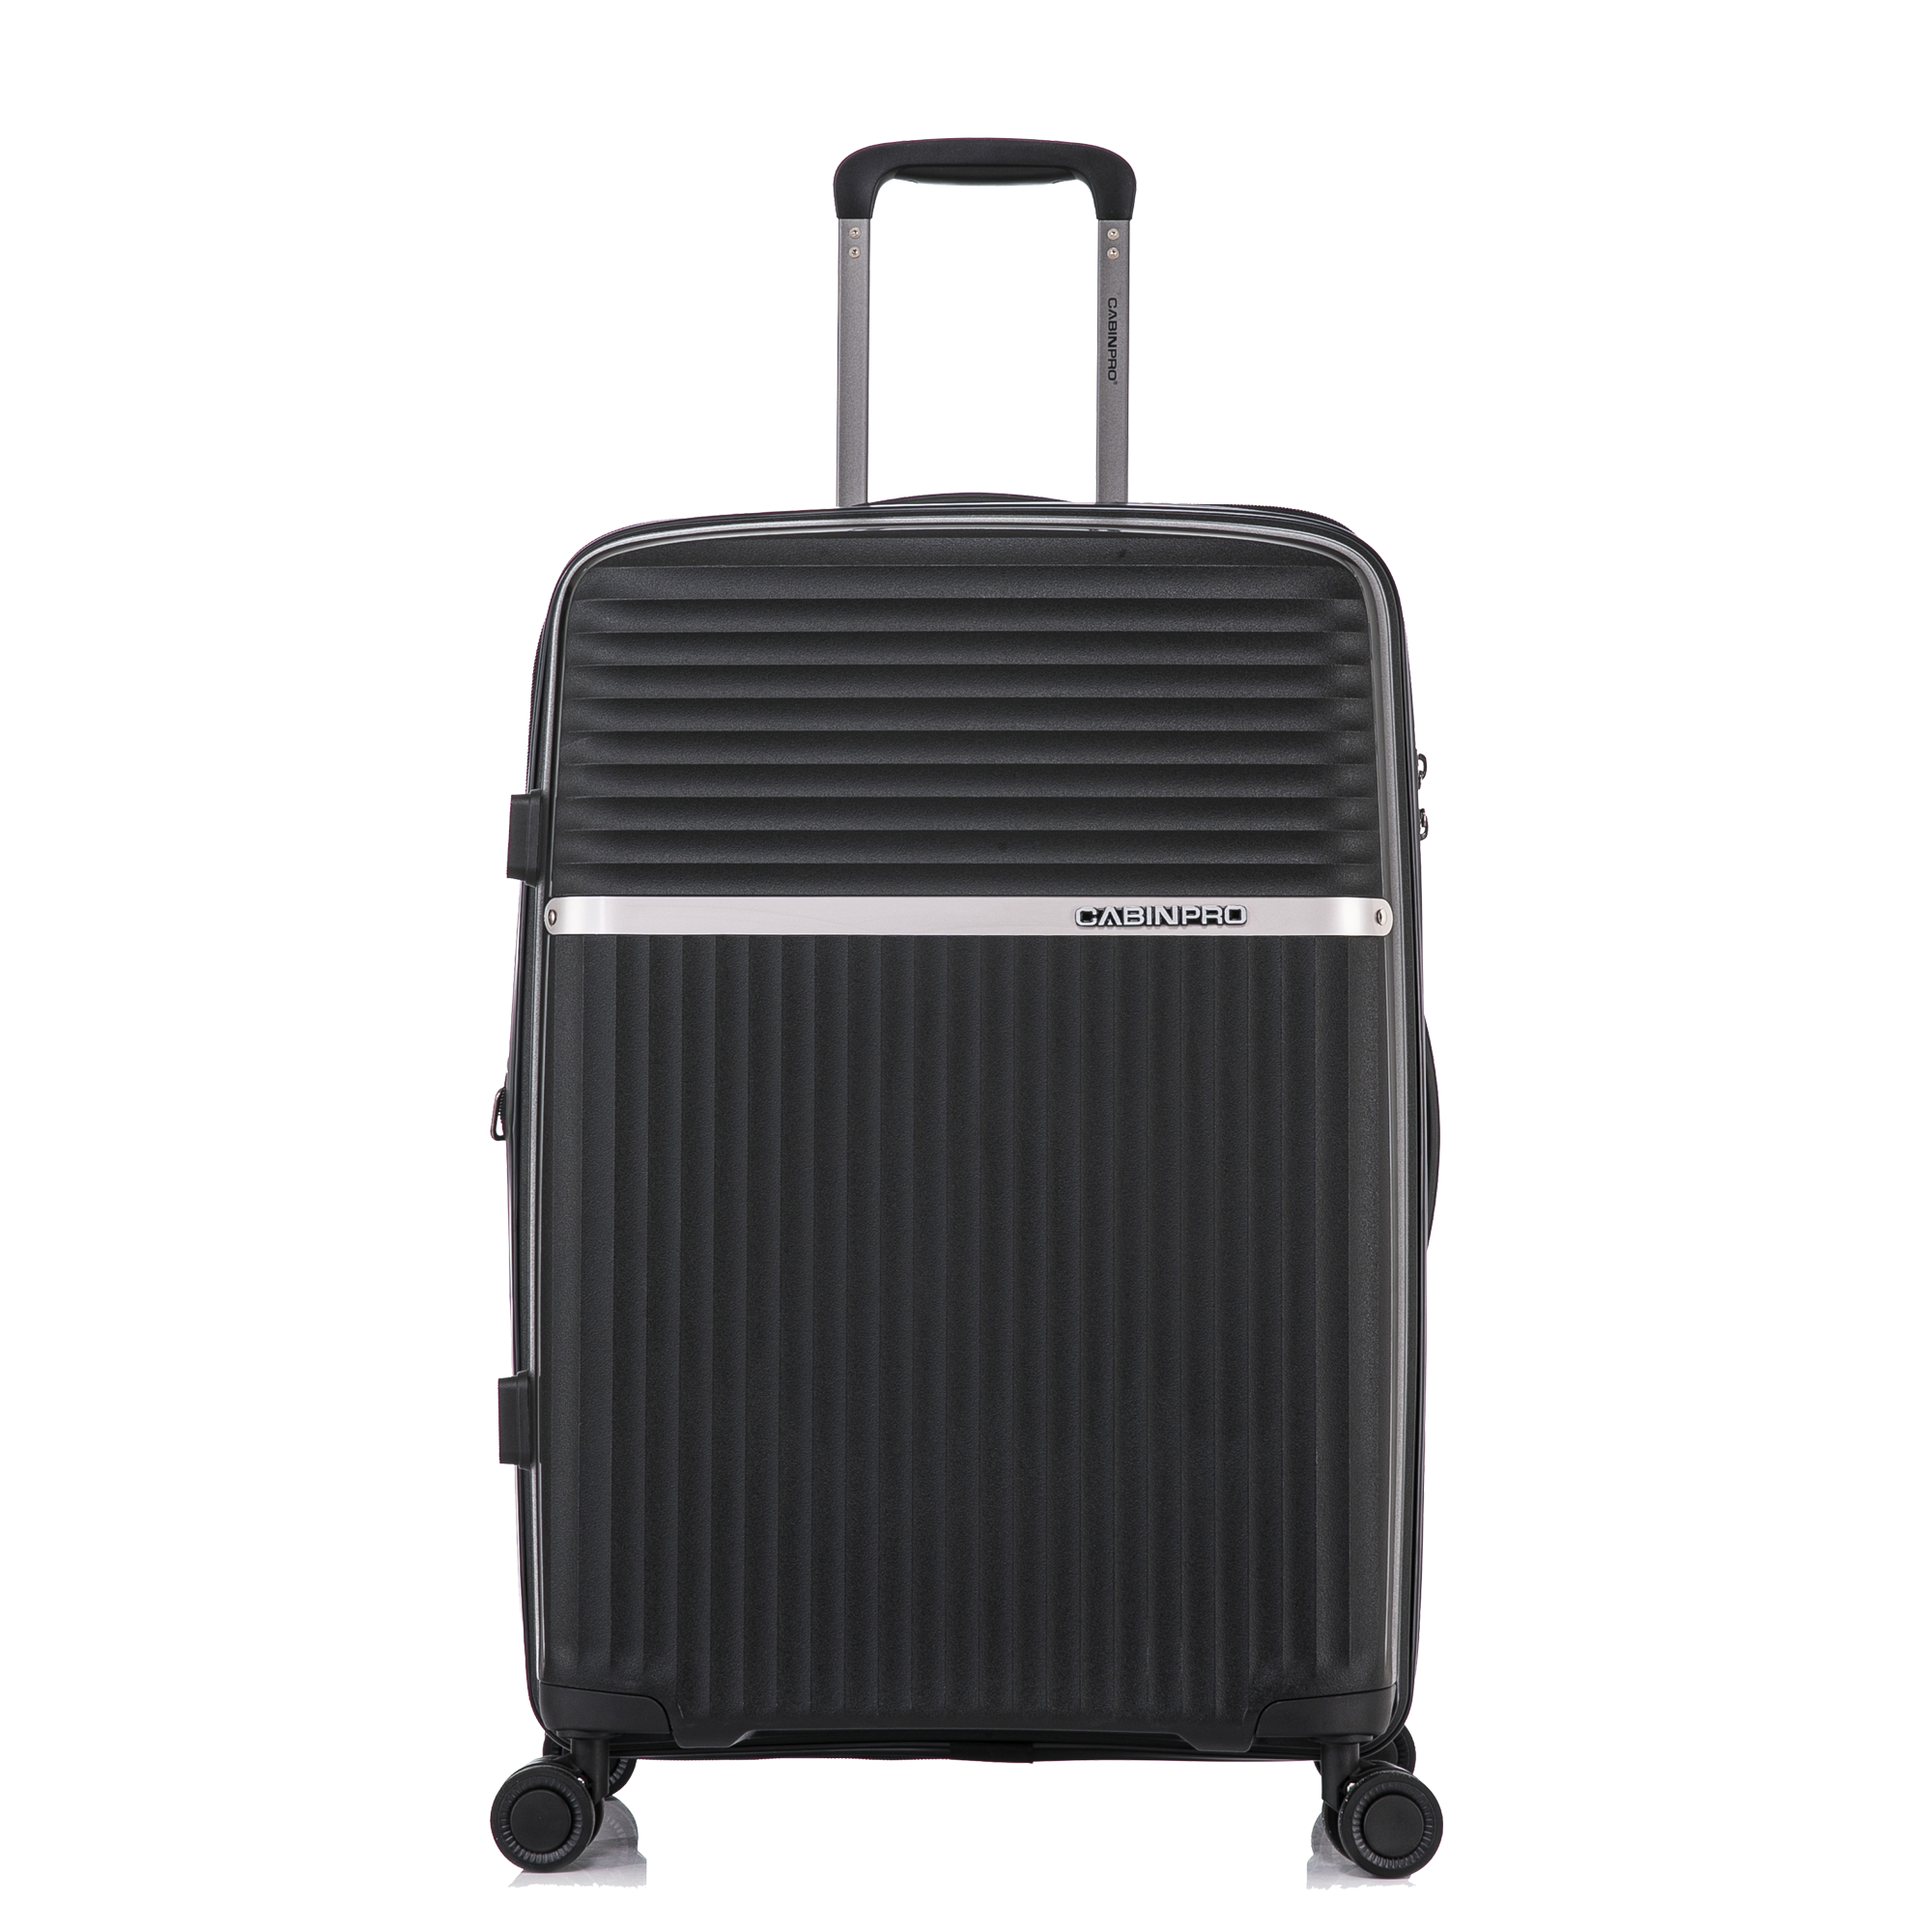 CabinPro Hard Shell Expandable PP Travel Luggage Trolley Checked Suitc